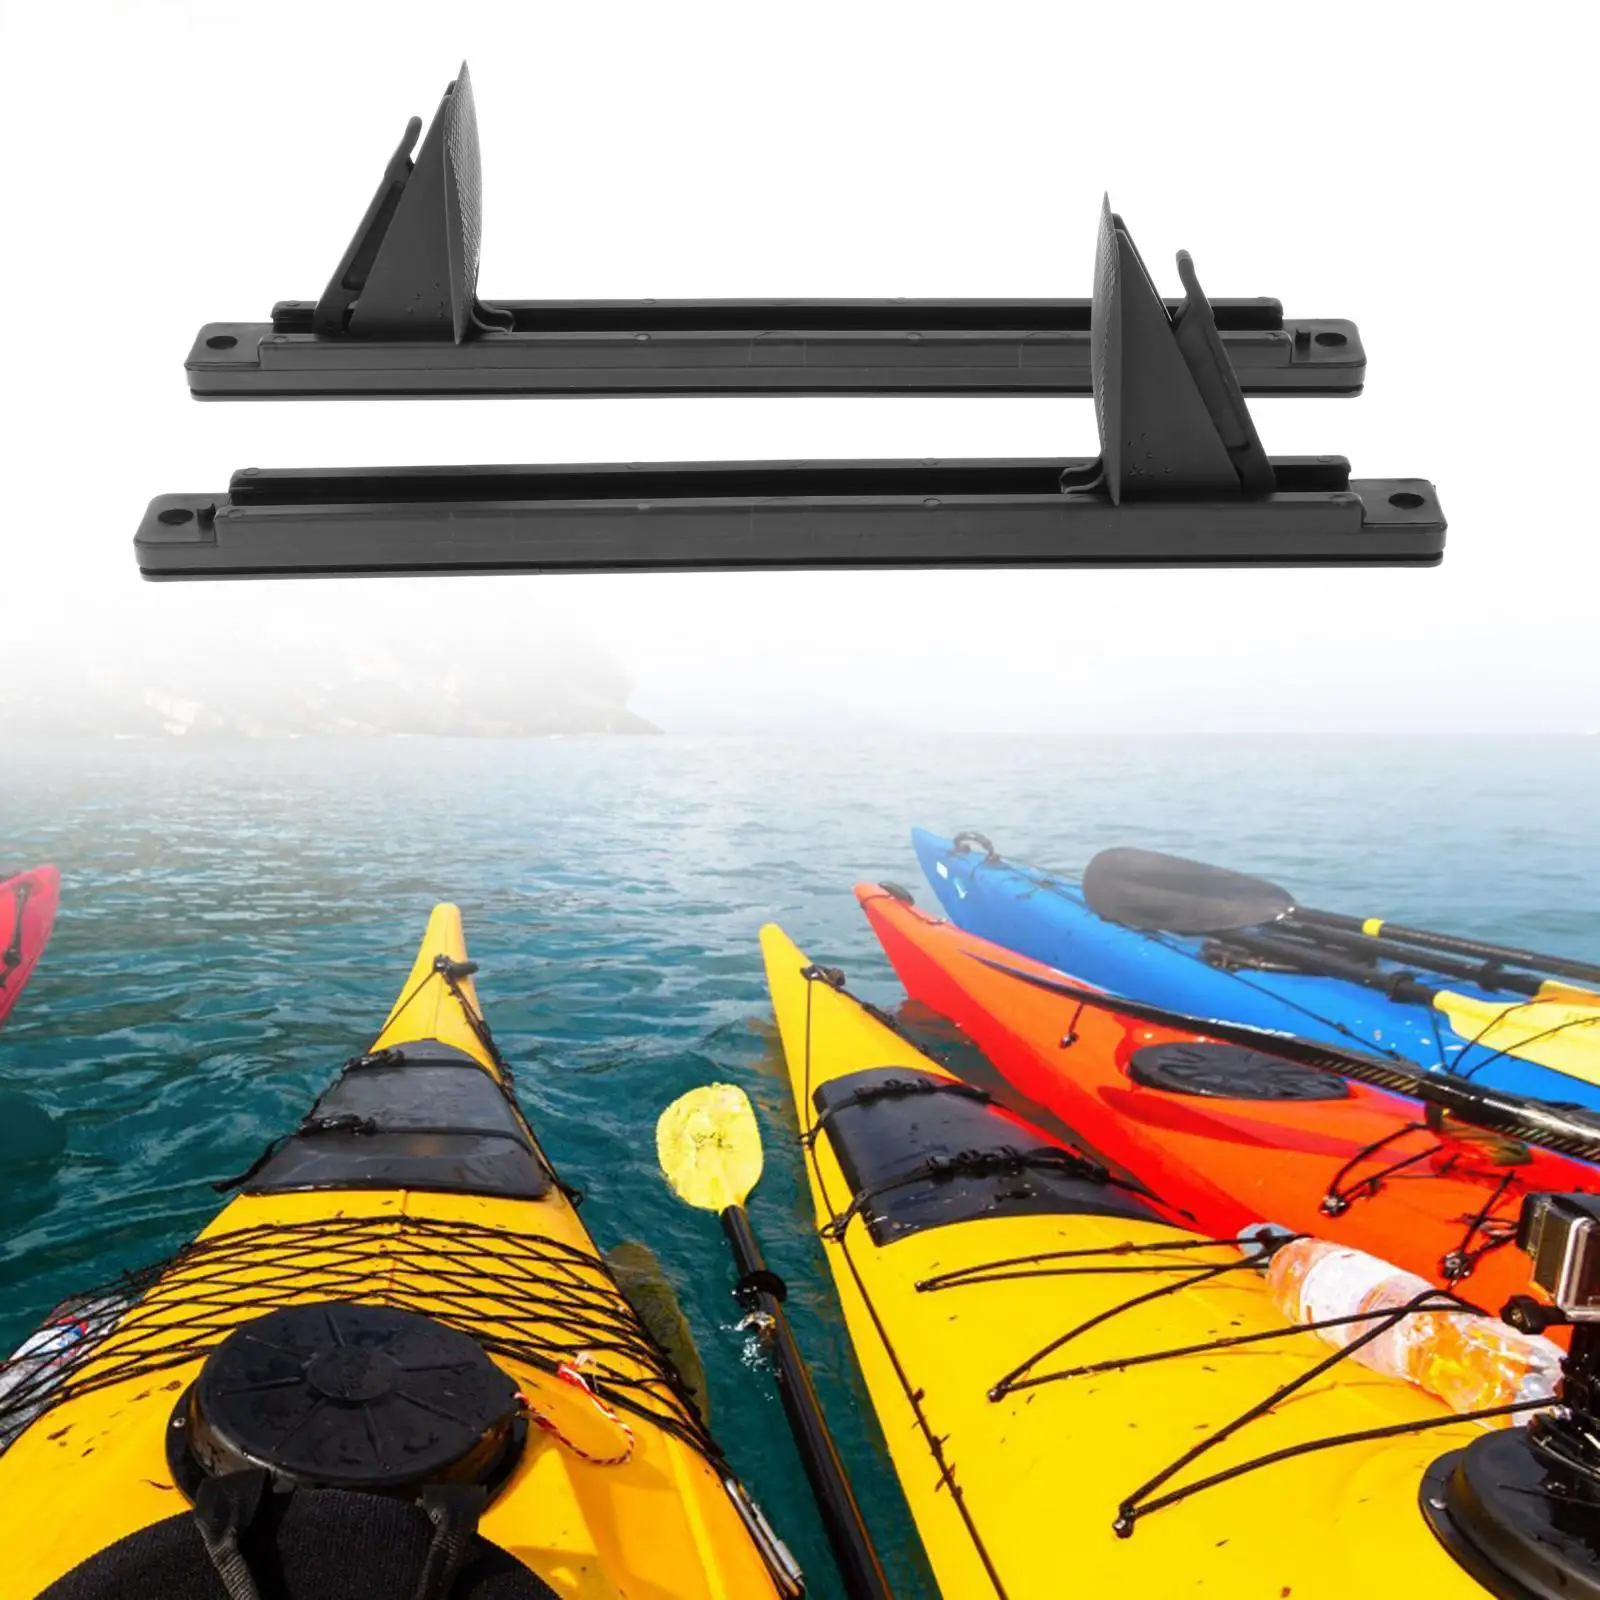 Kayak Foot Pegs Easy to Install Set of 2 Replacement Nylon with Lock 15 Inches Kayak Accessories Black Foot Rest Pedals